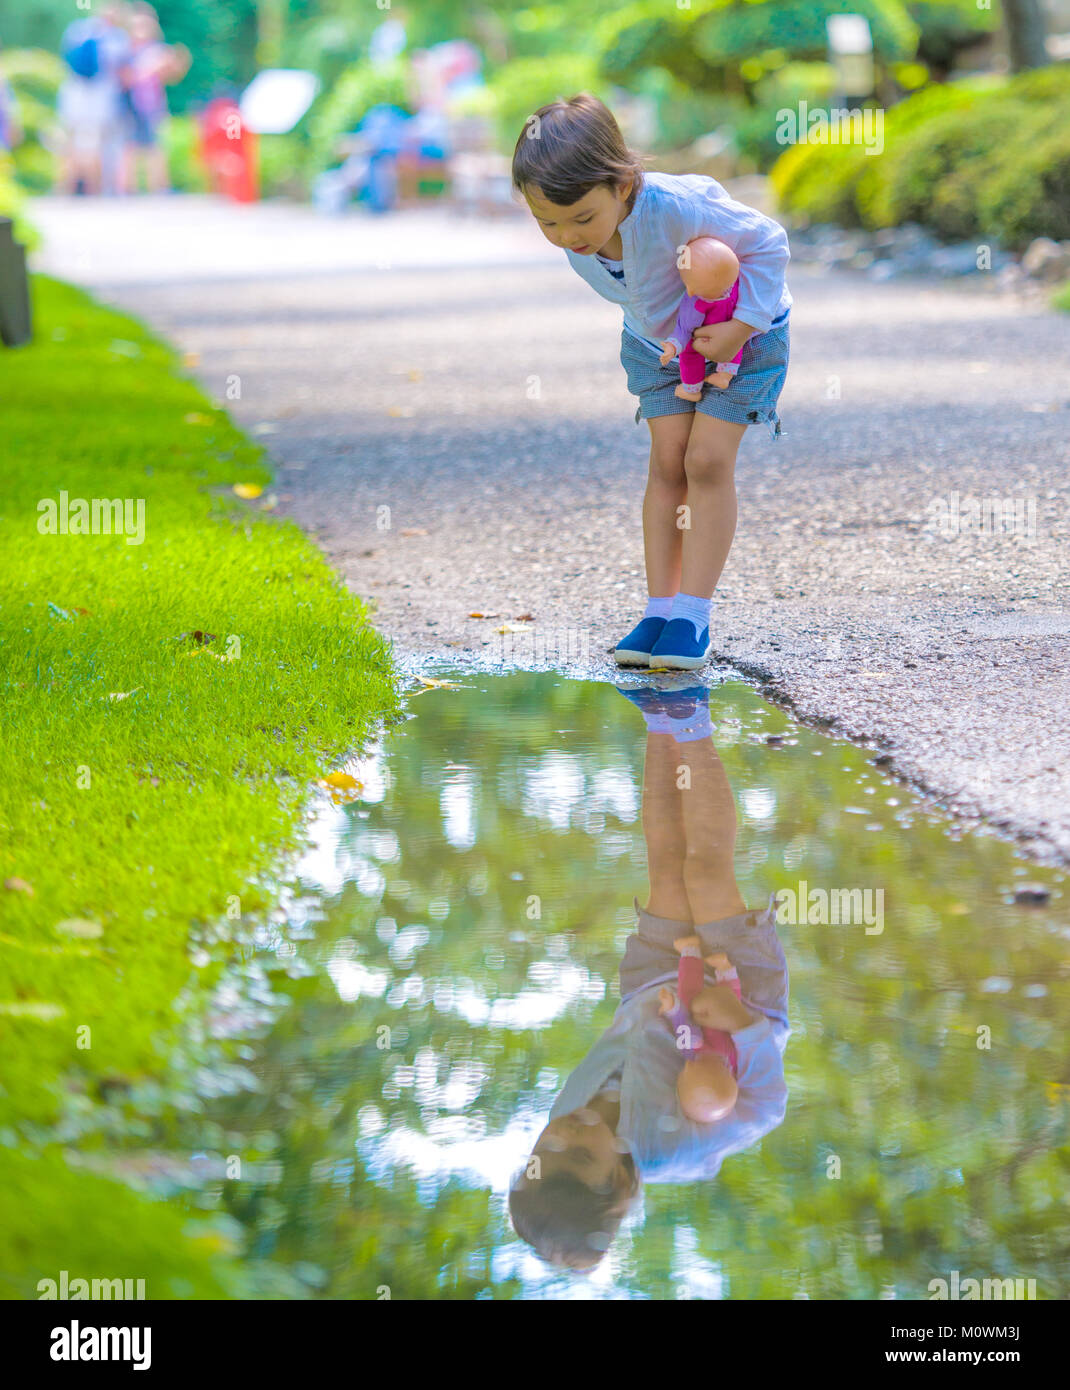 little girl looks in a puddle like a mirror Stock Photo